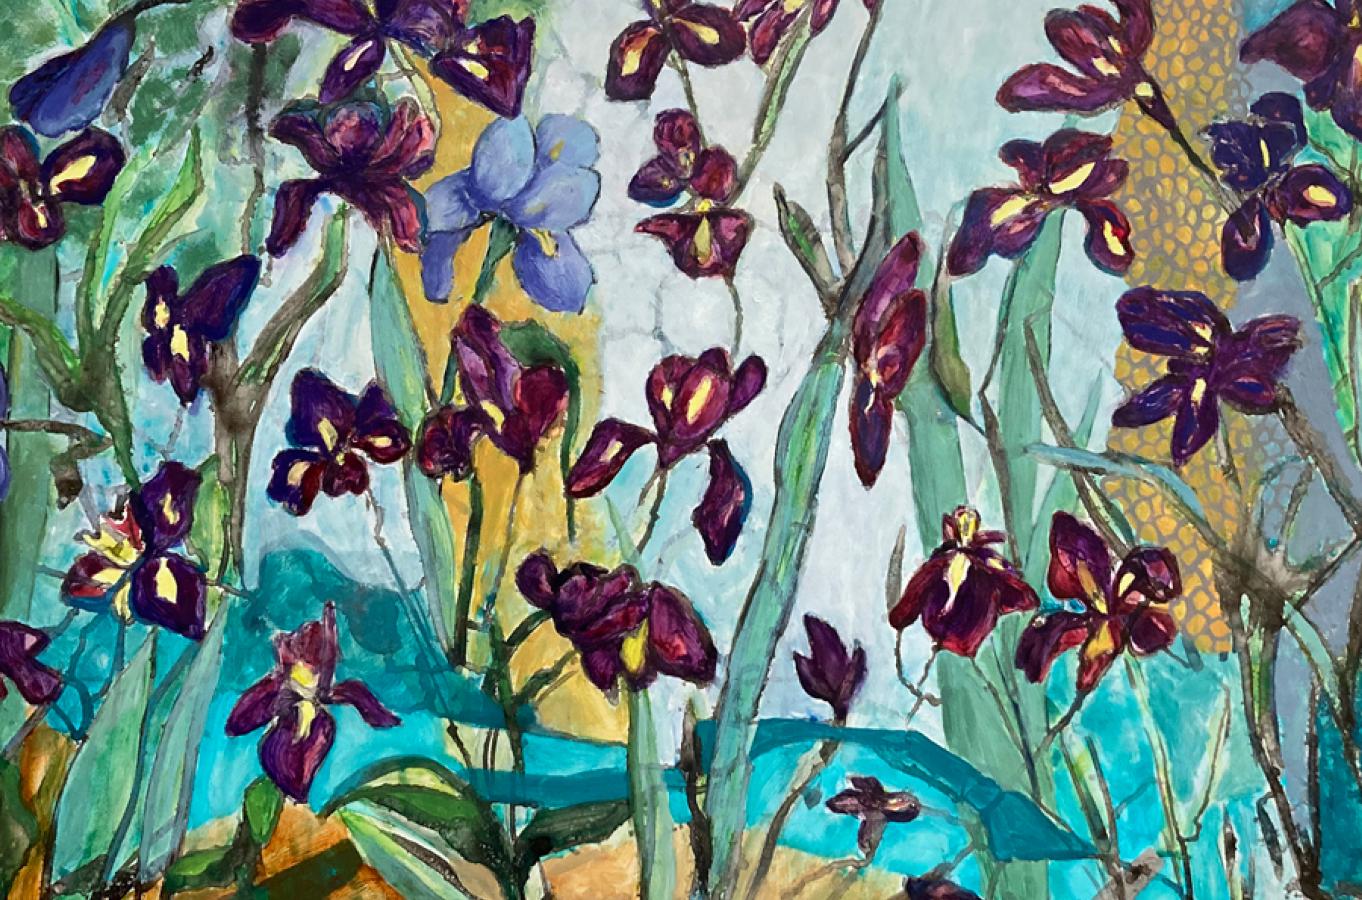 Irises     Ink,  Watercolor, Oil on Yupo paper 26” x 40”   Framed 31 ¼” x 45 ¼” - American Realist Art by Julie England